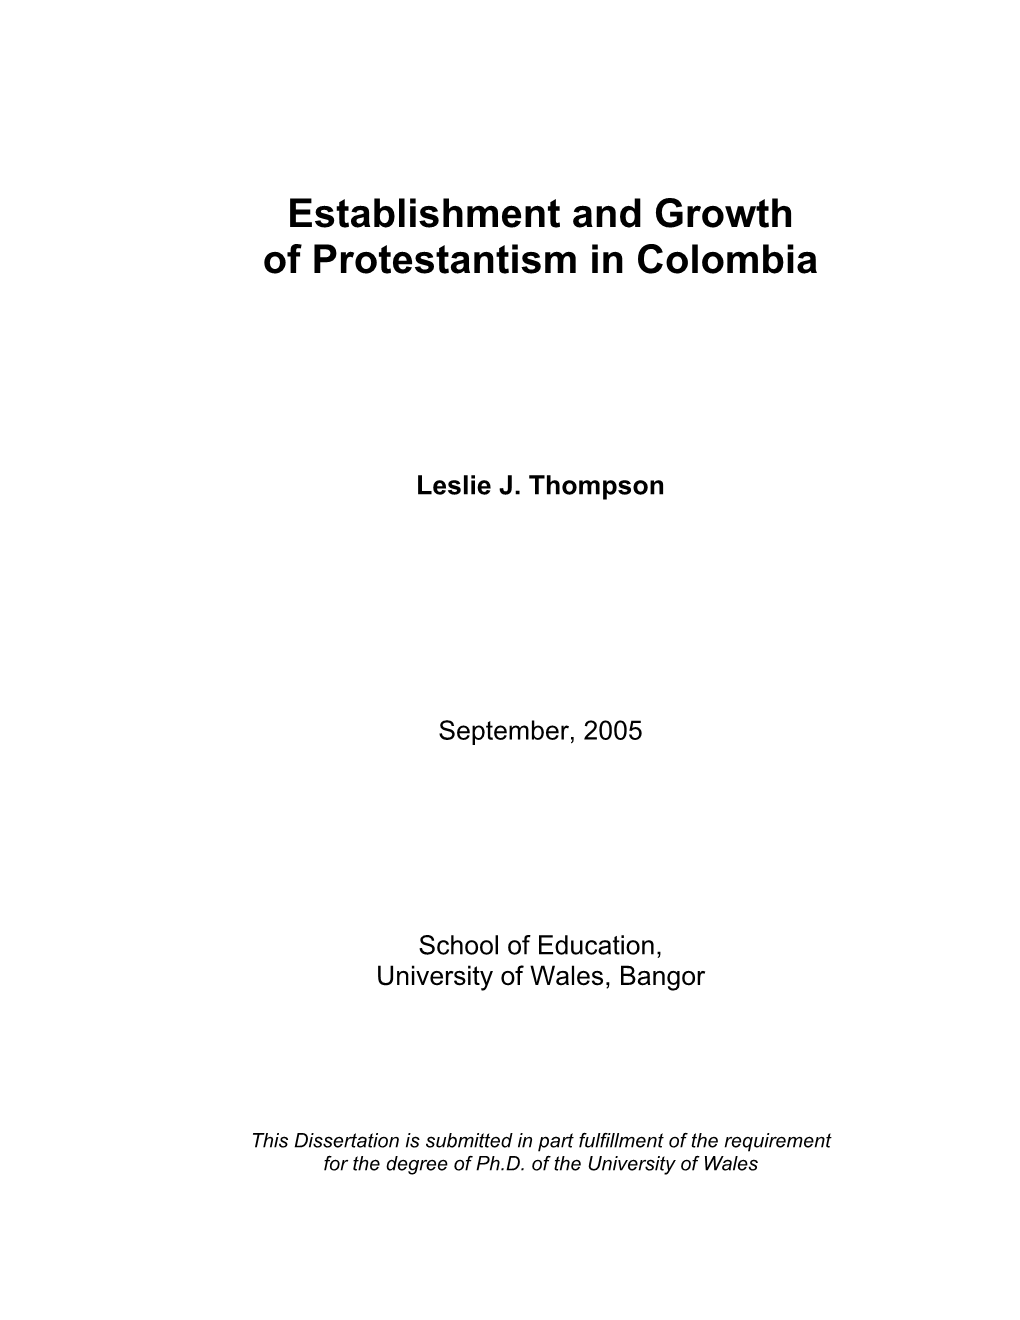 Establishment and Growth of Protestantism in Colombia